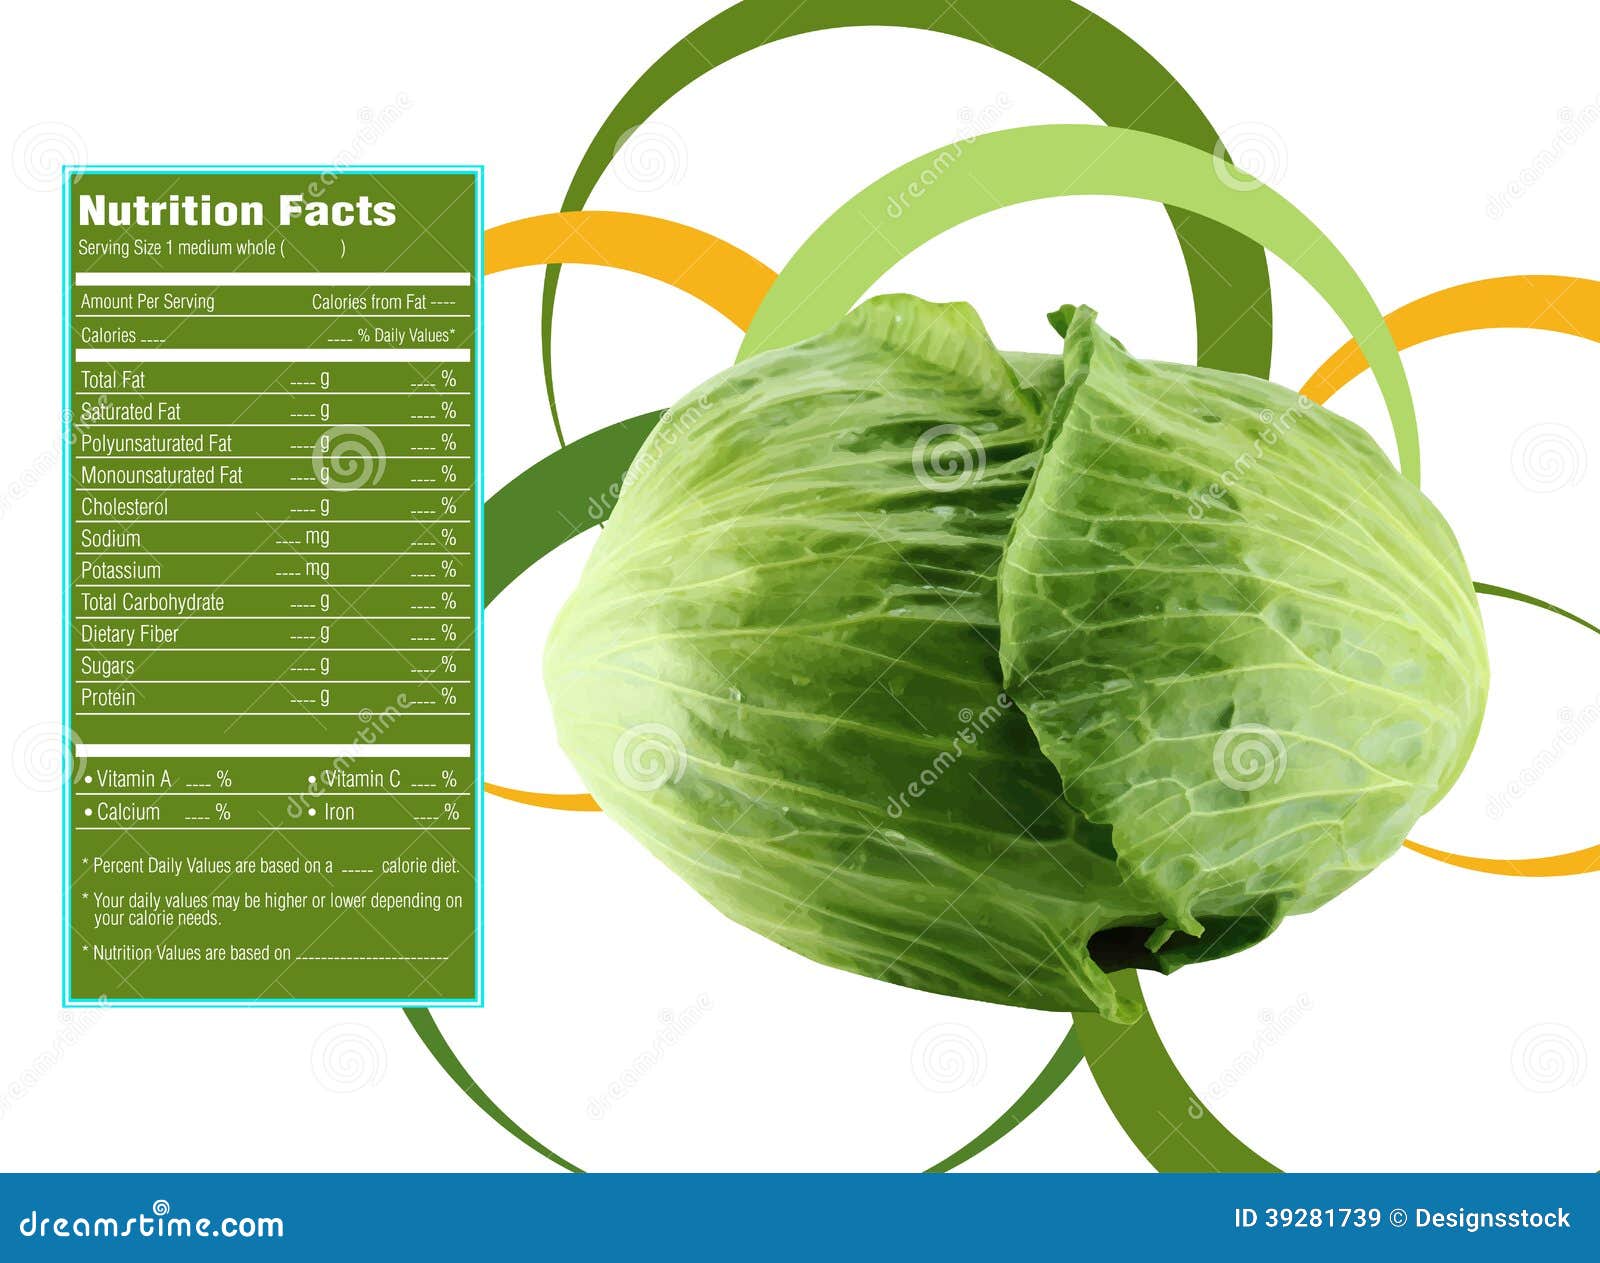 Green Cabbage Nutrition Facts Stock Vector Image 39281739 with Nutrition Facts Cabbage